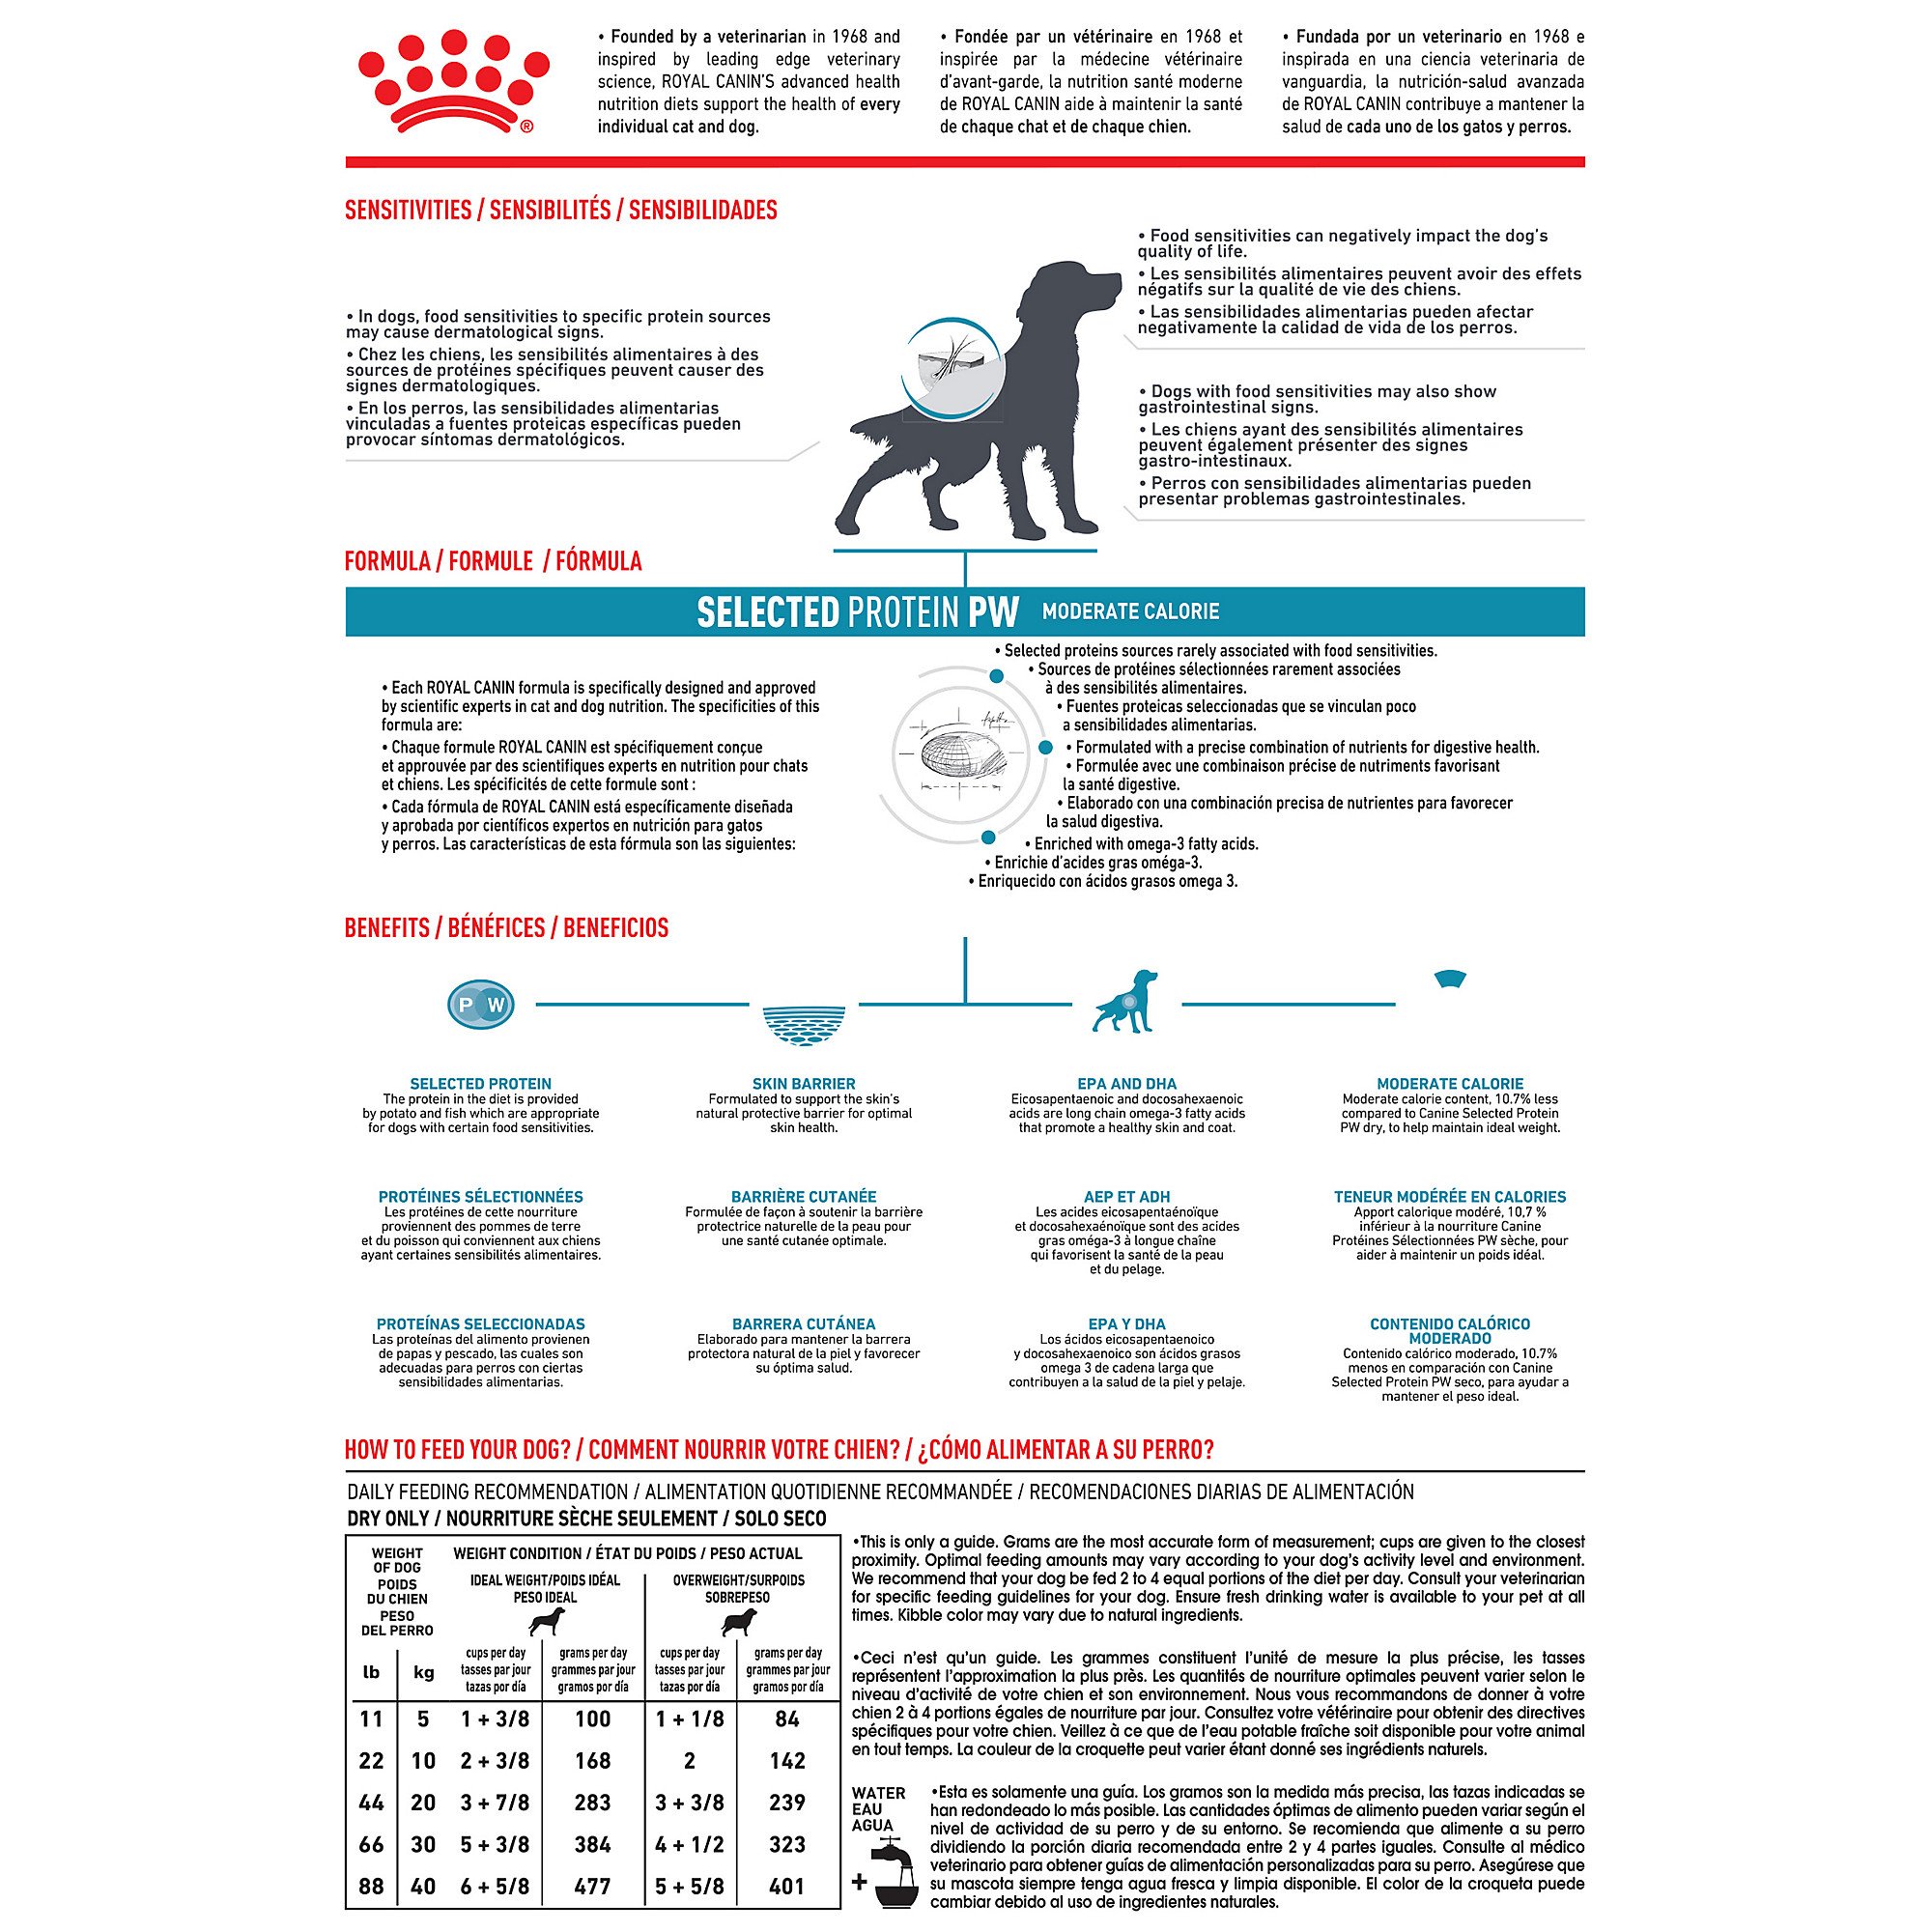 ROYAL CANIN VETERINARY DIET® Canine Selected Protein PW Moderate Calorie  Dry Dog Food | Shop myVCA